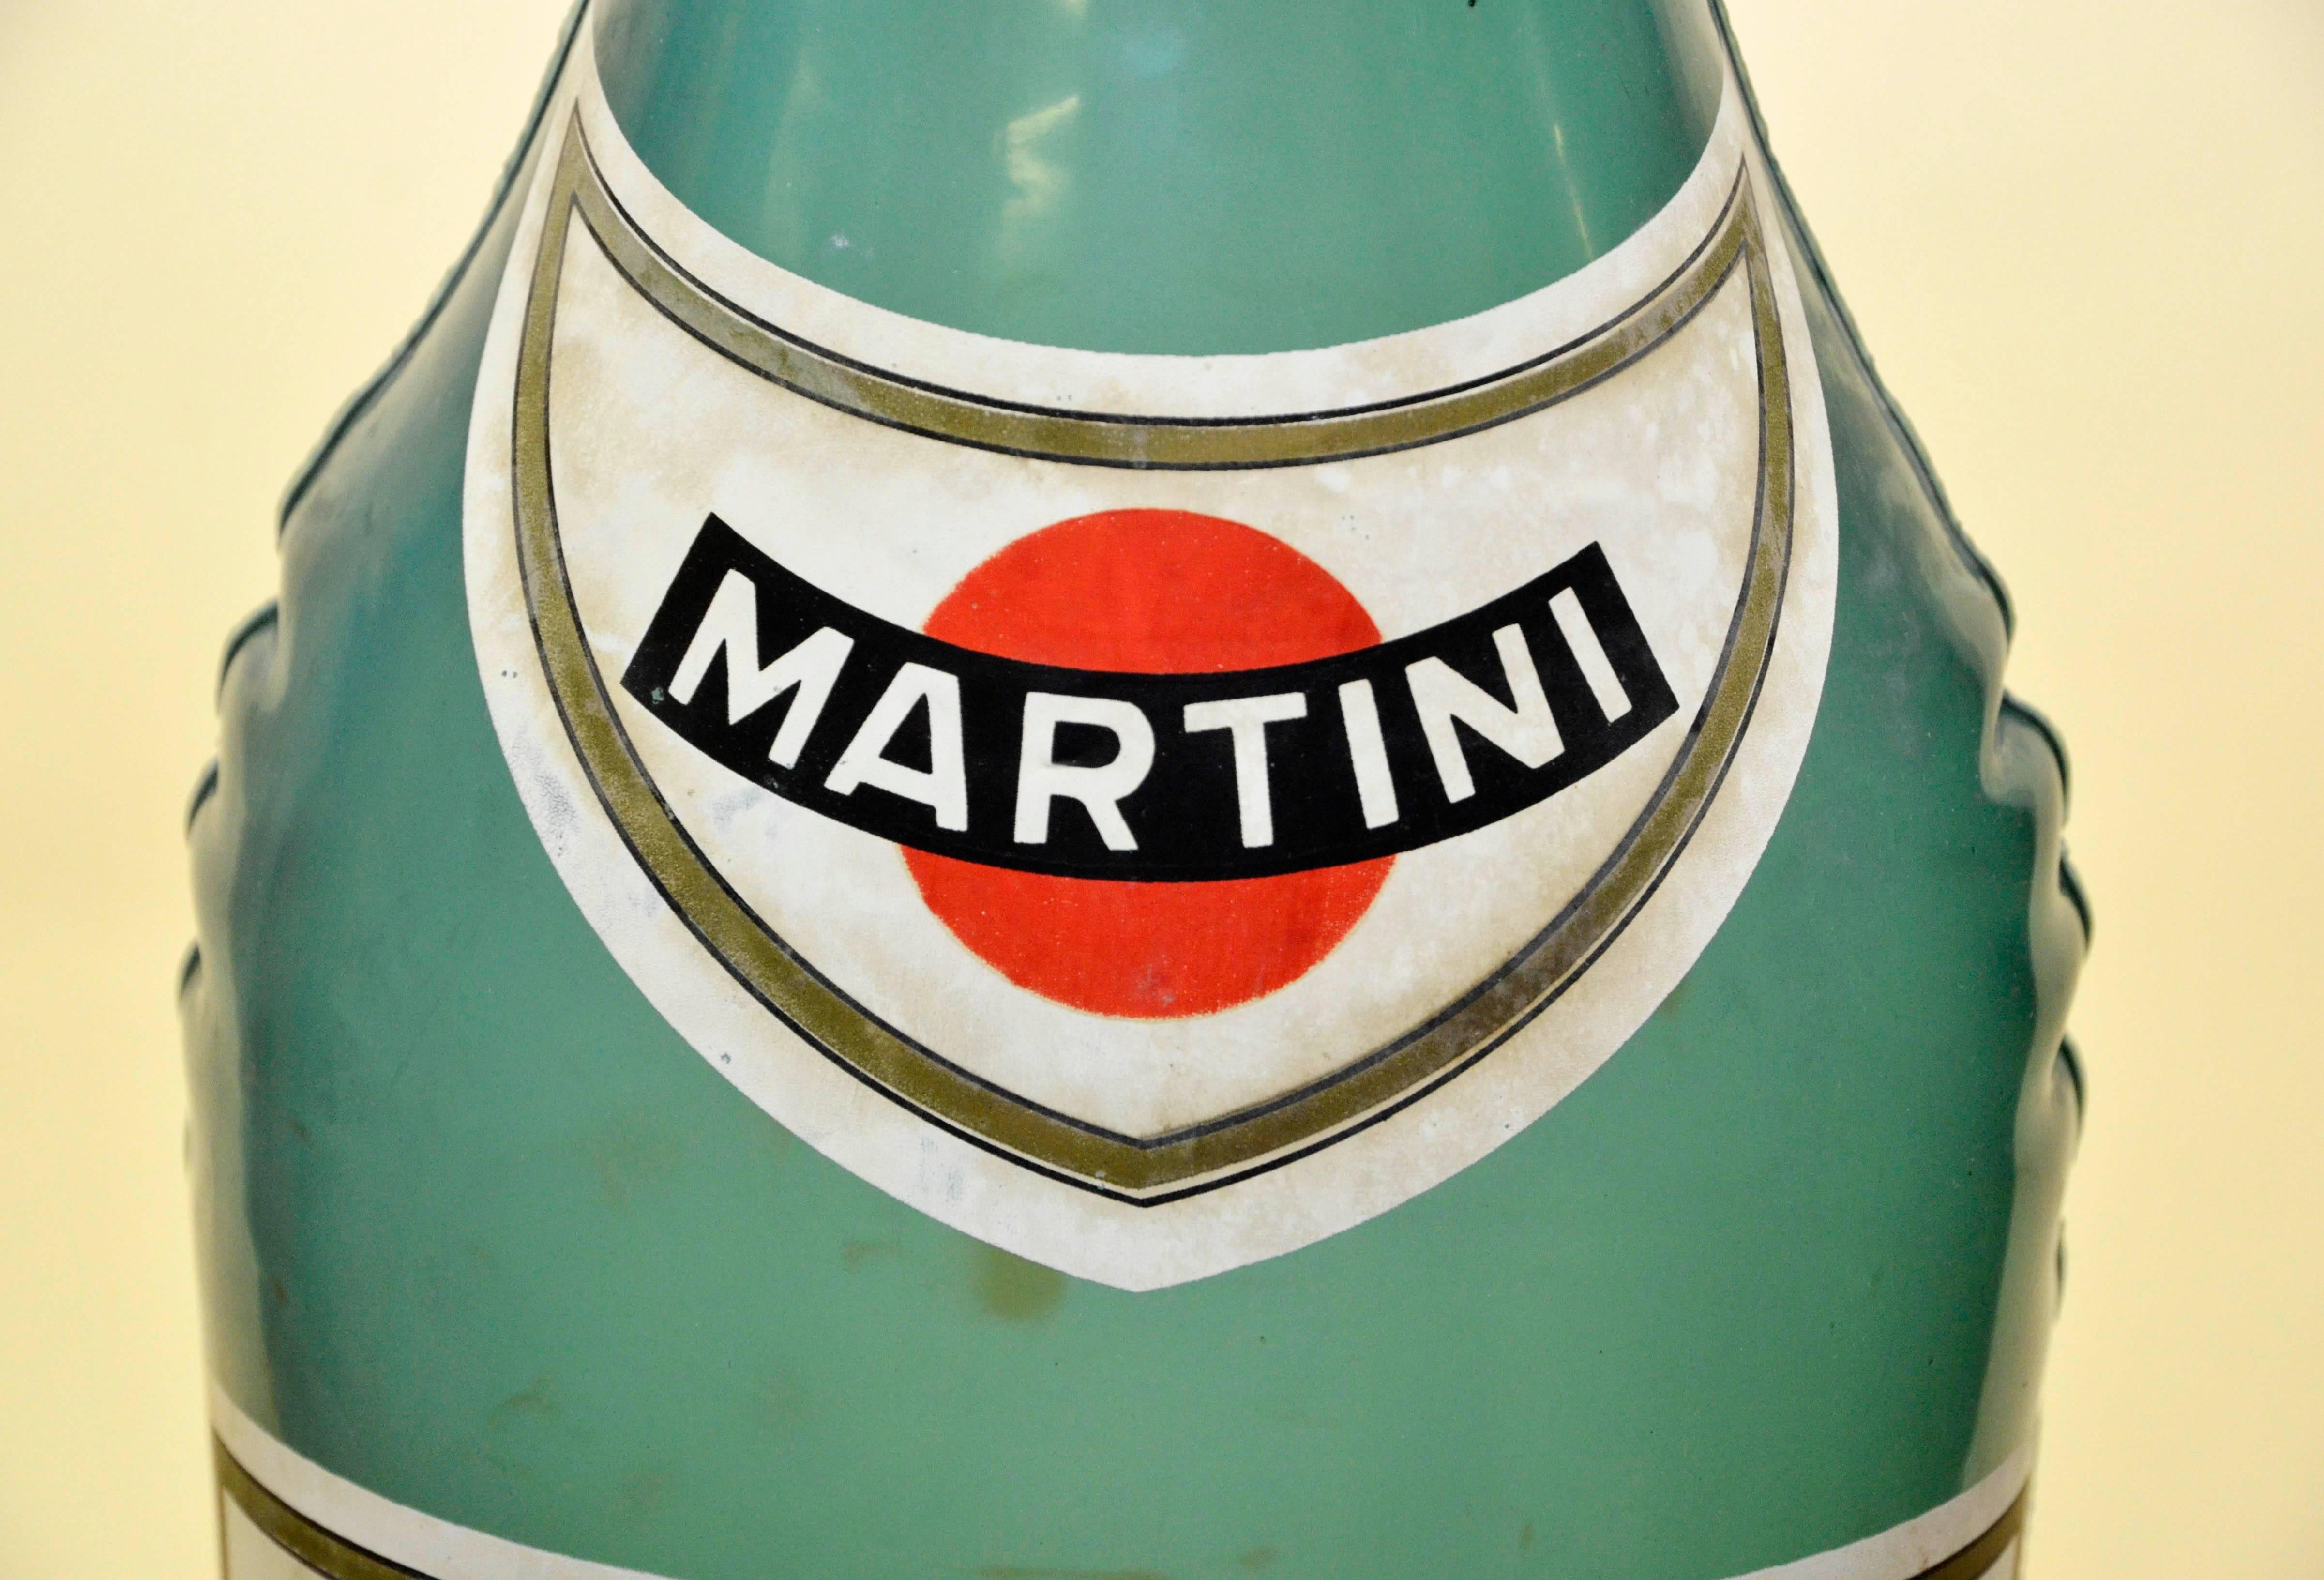 Large Spanish inflatable Martini & Rossi vino vermouth plastic bottle in very good conditions. 
At the lower front of the inflatable bottle there are the names of the three Spanish cities of Barcelona, Madrid and Bilbao.

Collector's